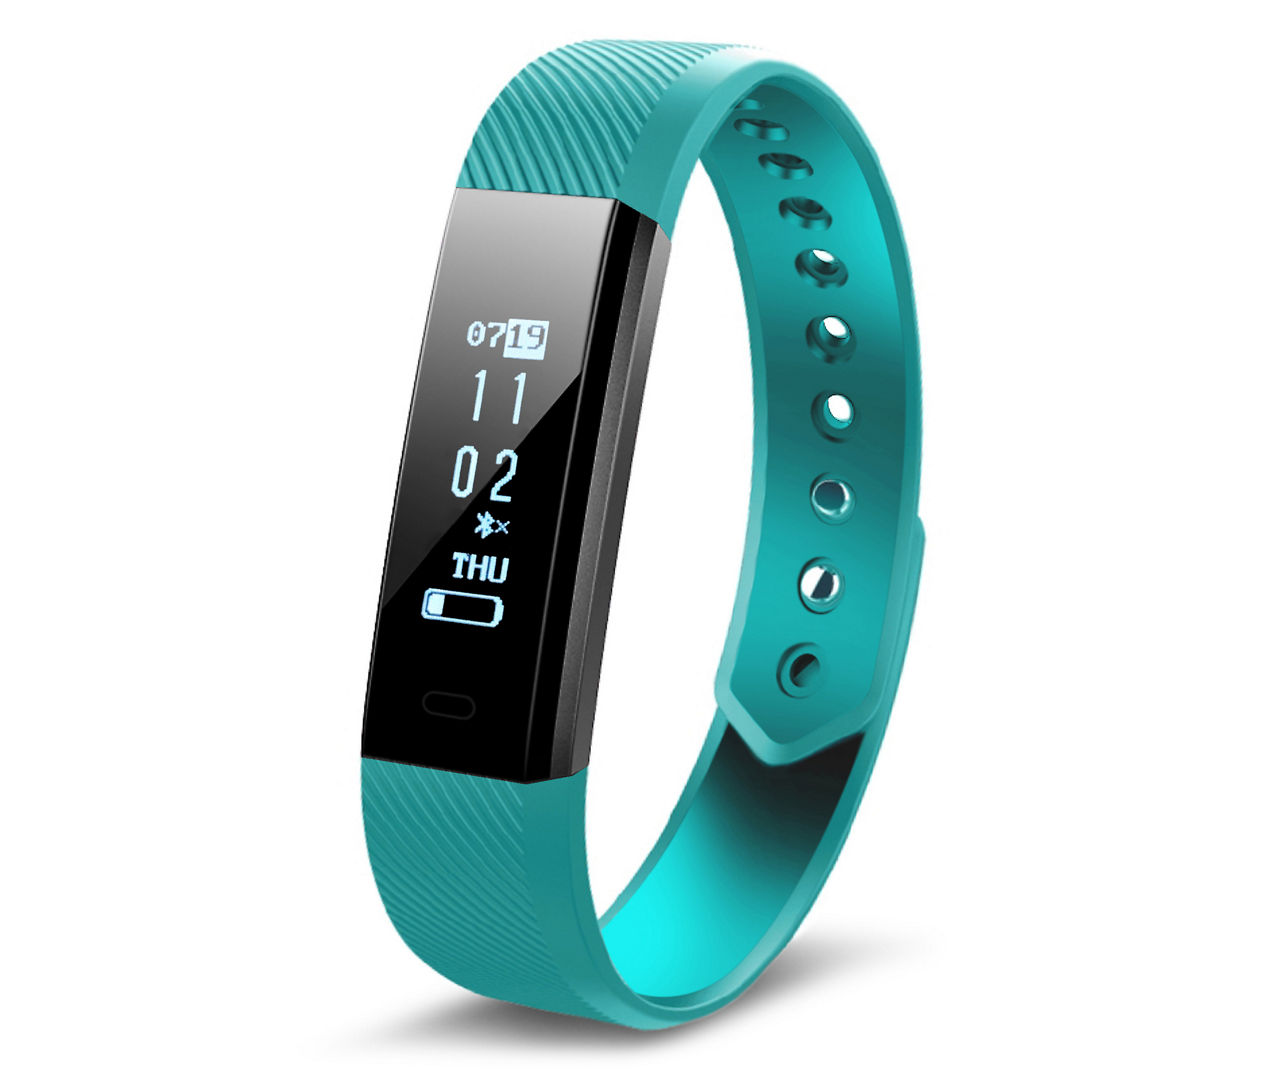 Color Blocks Smart Band Bracelet Watch Connects Bluetooth Active Tracker